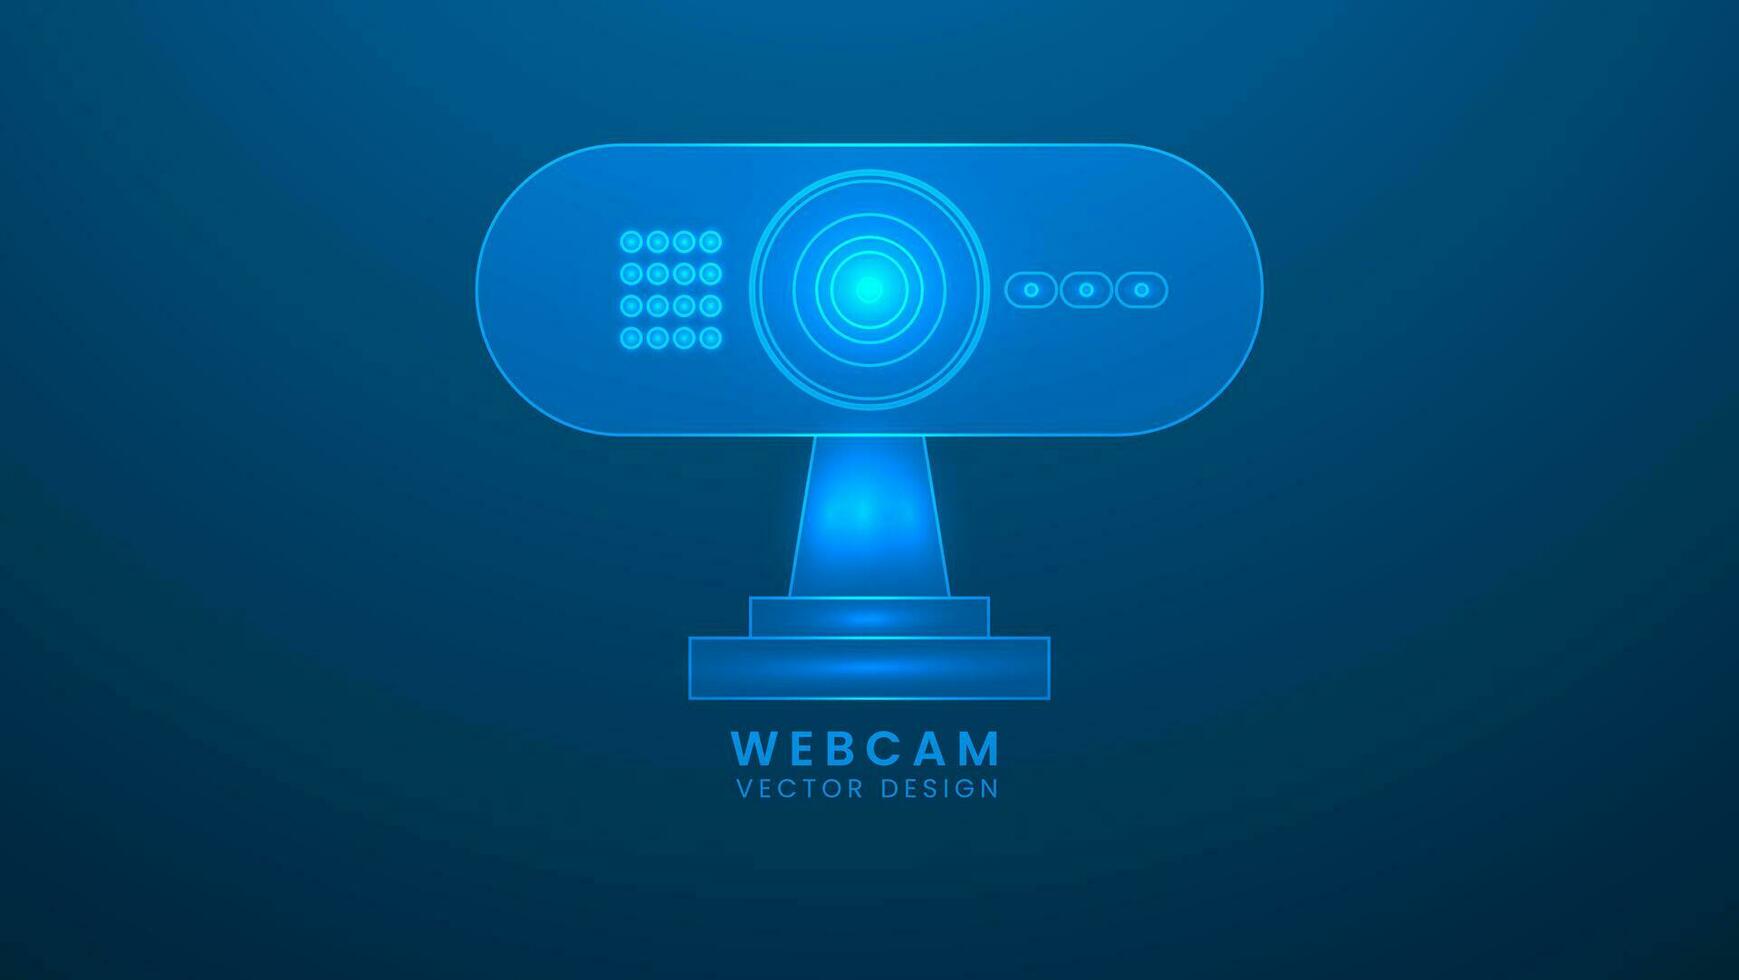 External webcam for a desktop monitor. Security and technology. Vector illustration with light effect and neon